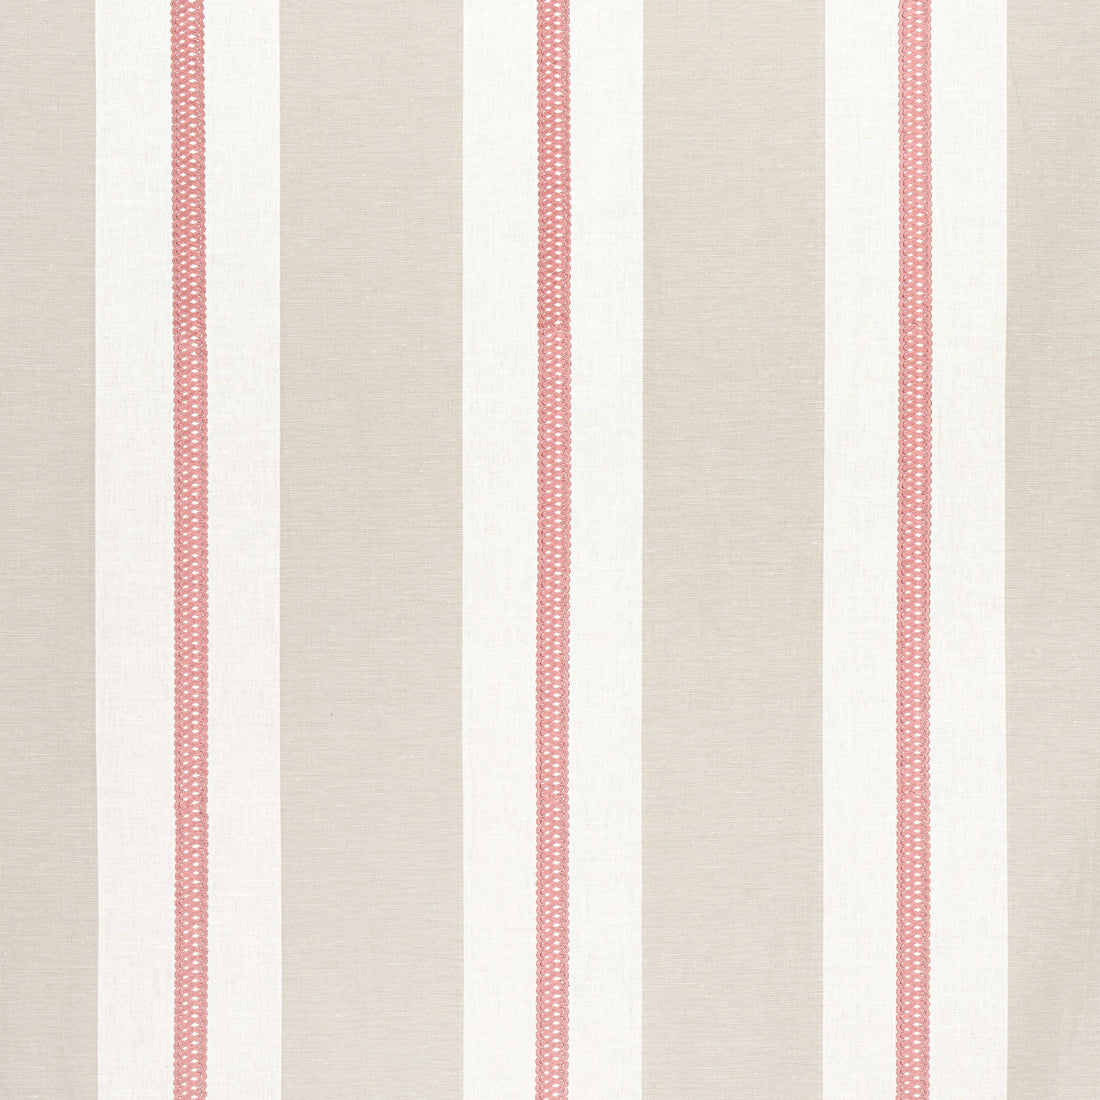 Alden Stripe Embroidery fabric in Rose color - pattern number AW24529 - by Anna French in the Devon collection